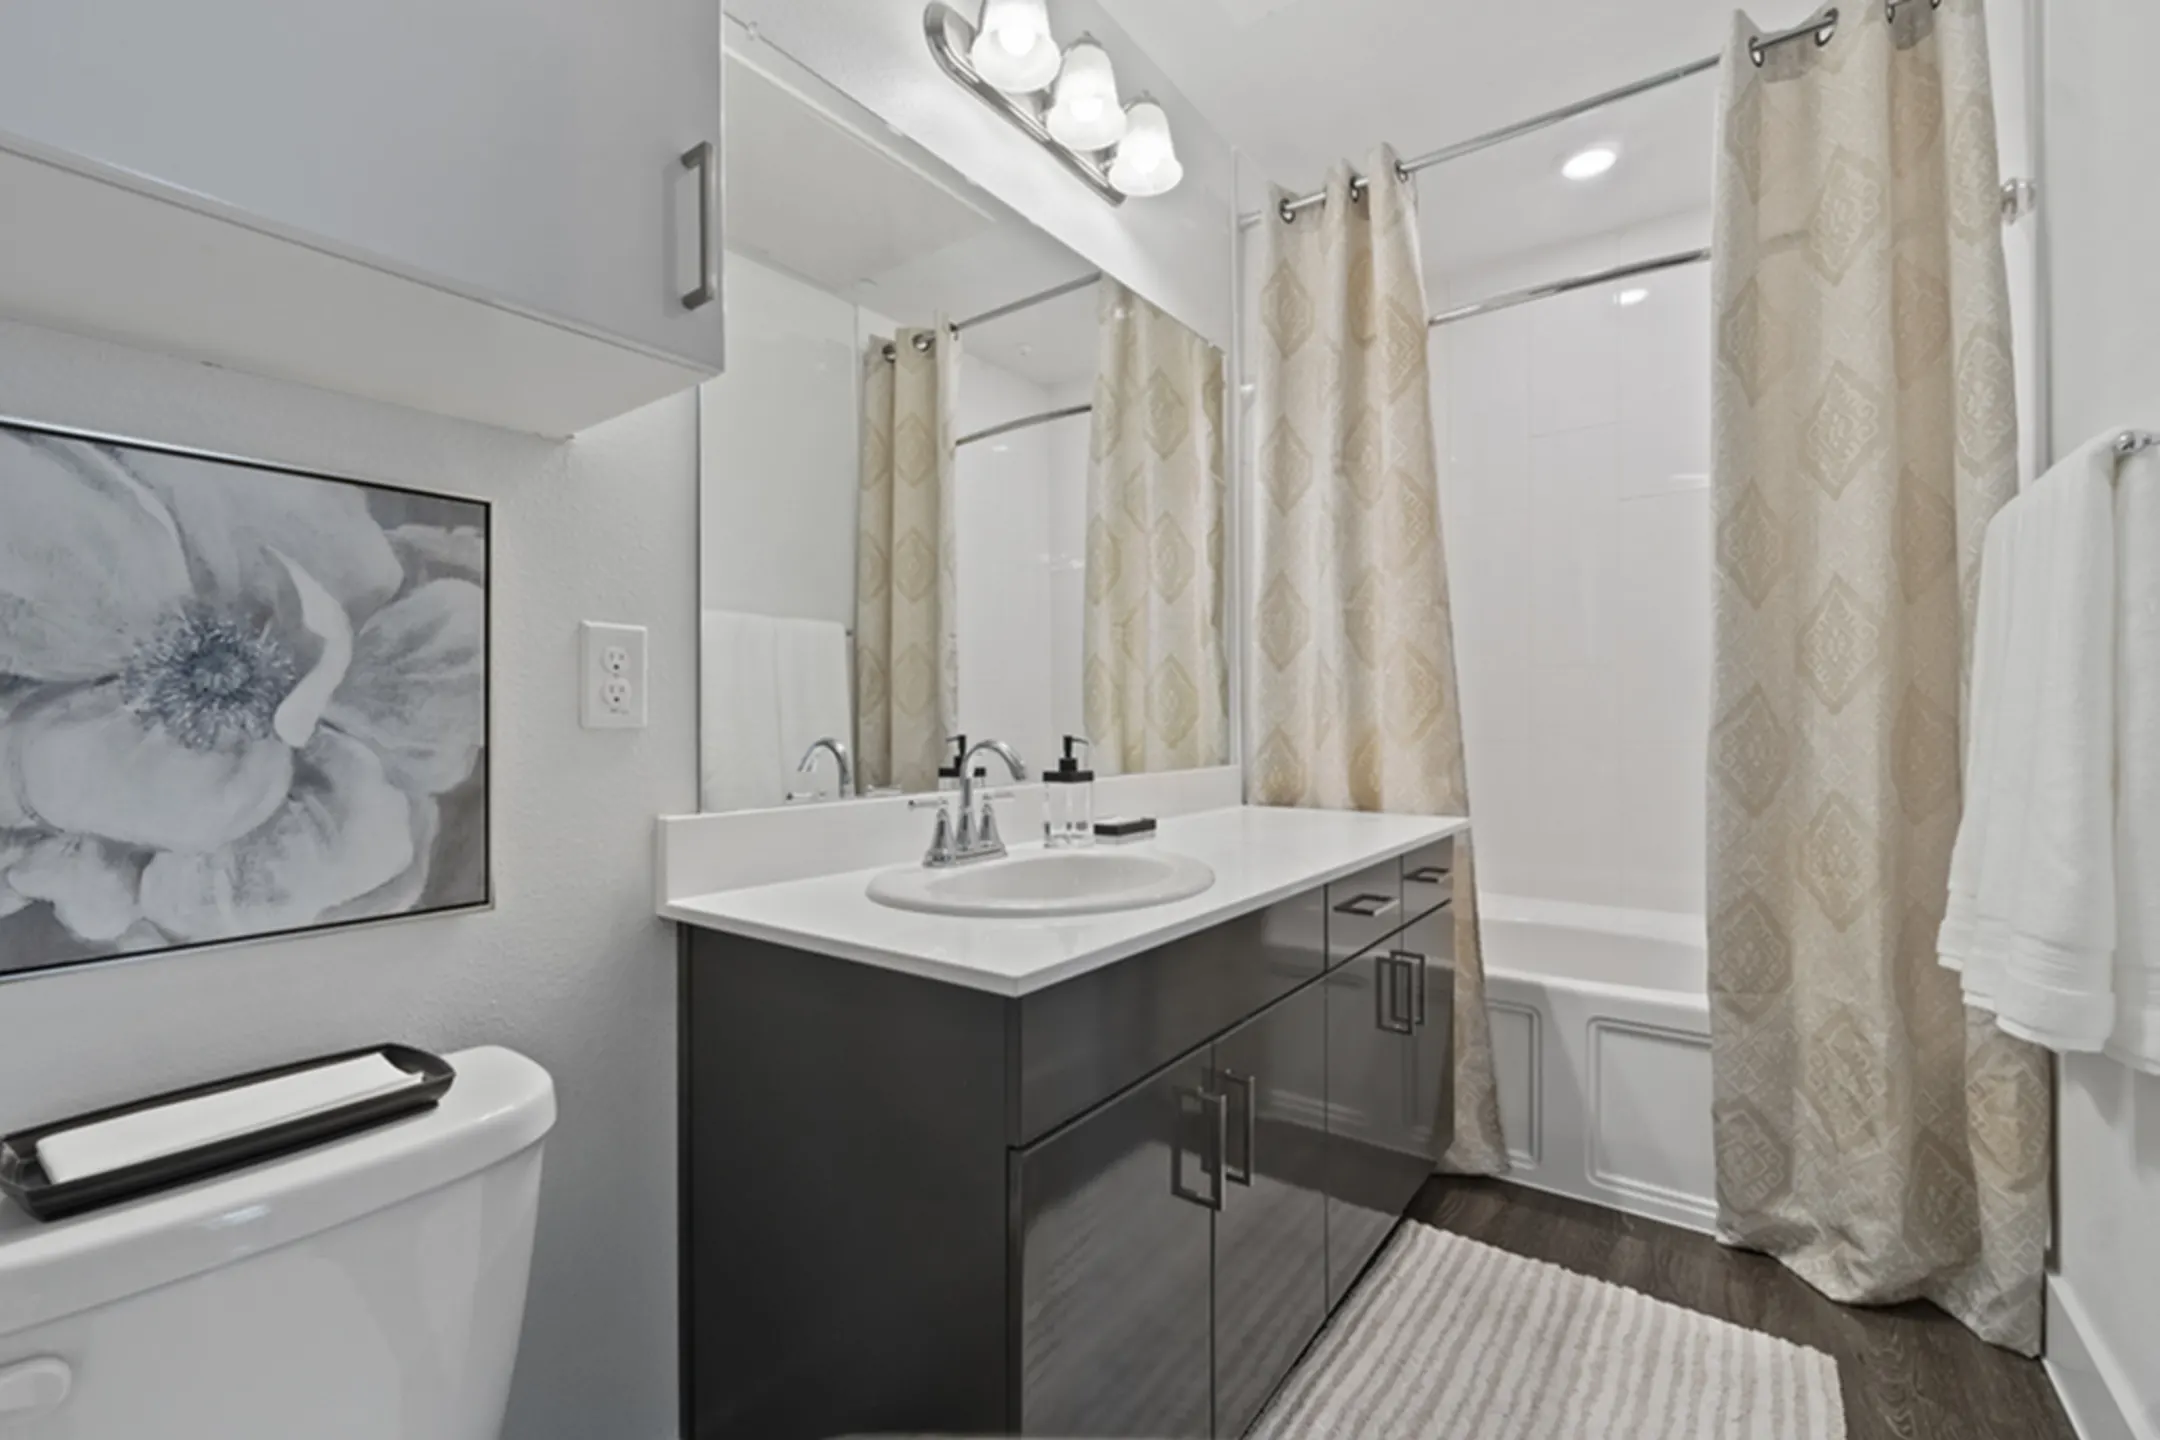 Bathroom - The Luxe at Mercer Crossing - Farmers Branch, TX